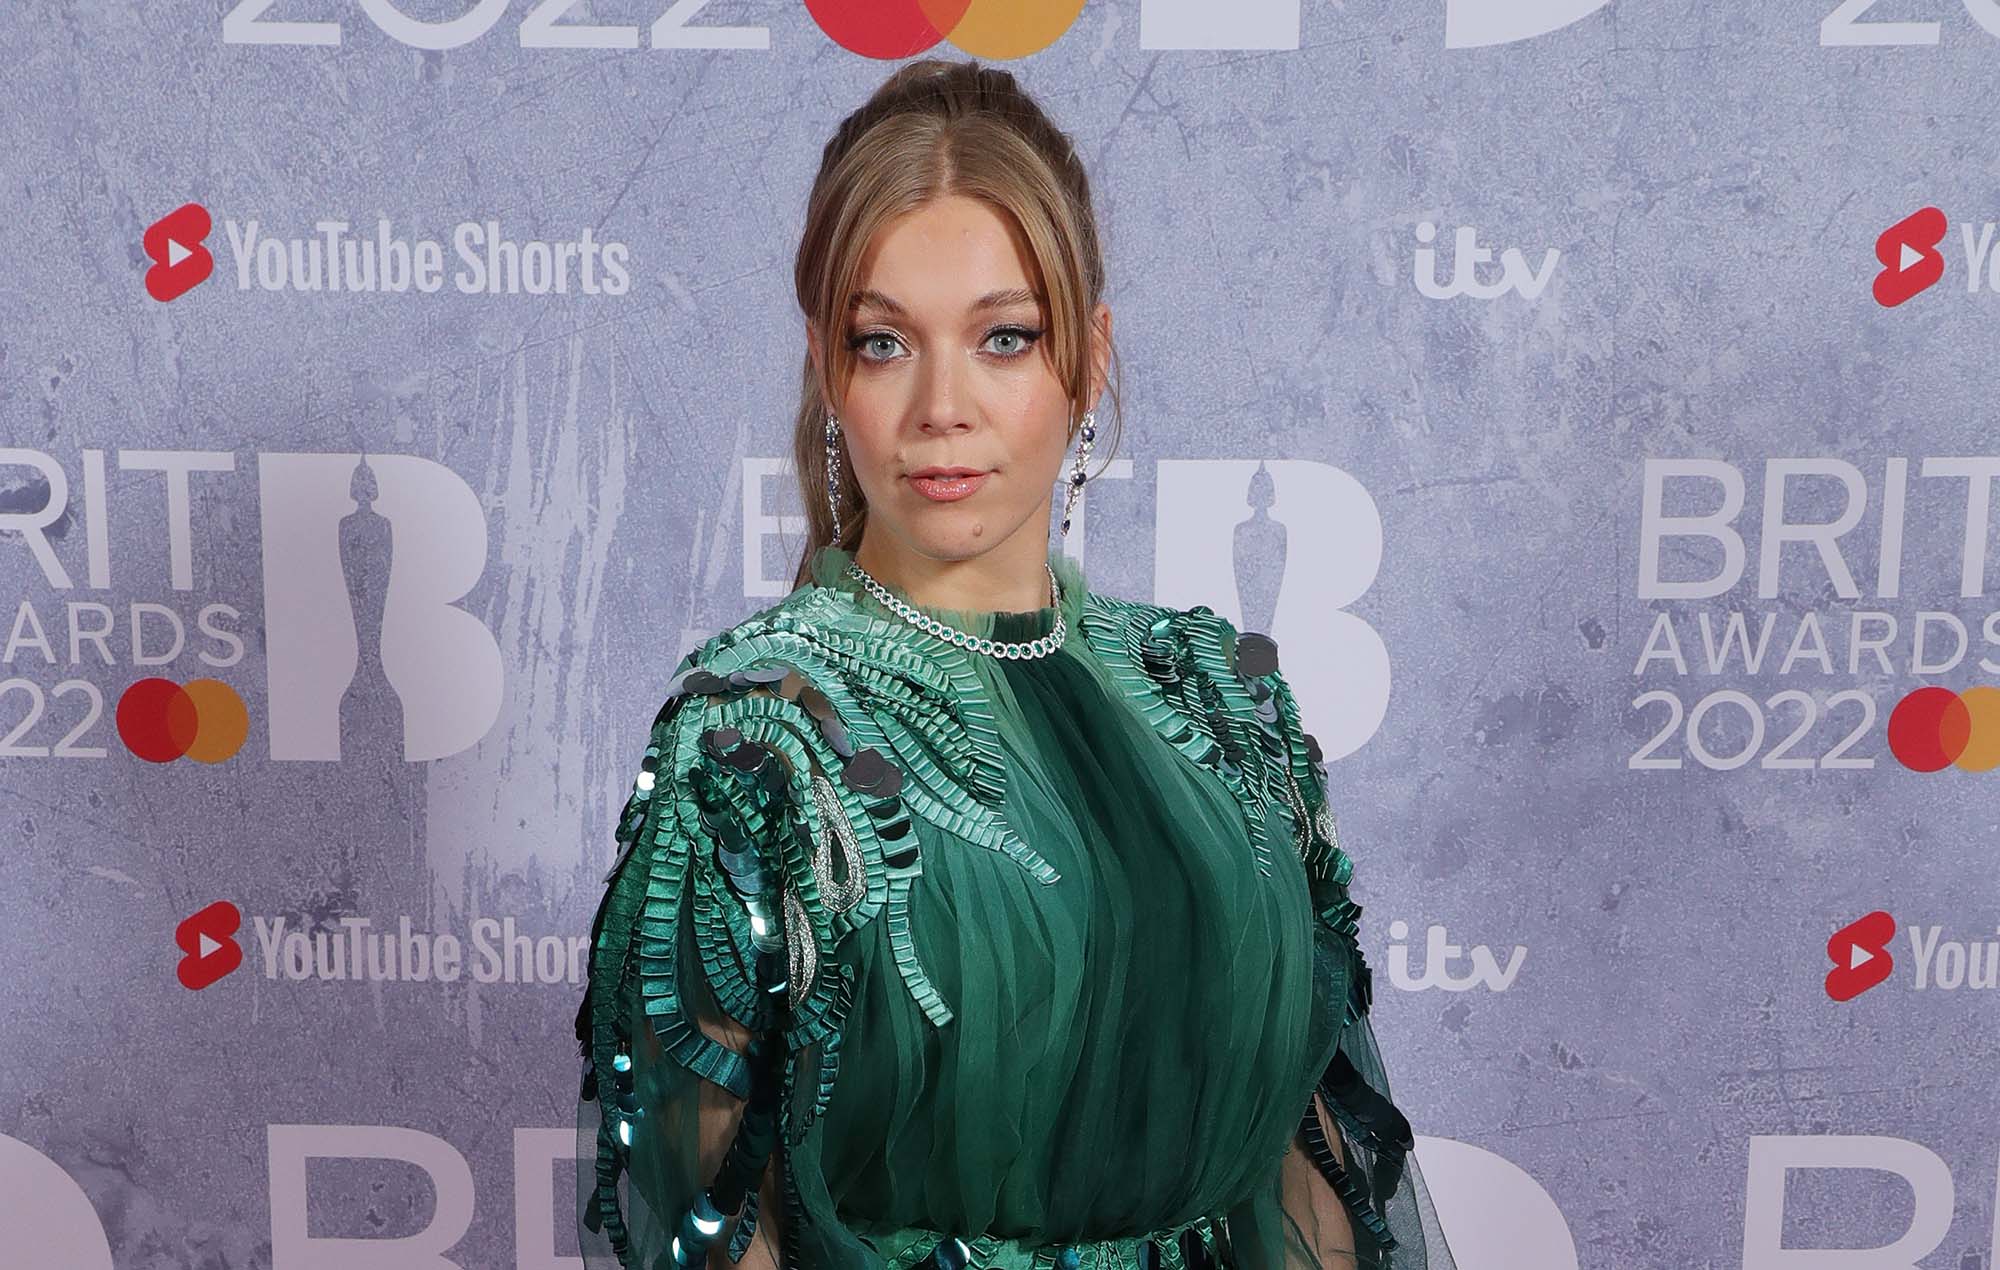 Becky Hill says she’s about to drop “another great dance collaboration”